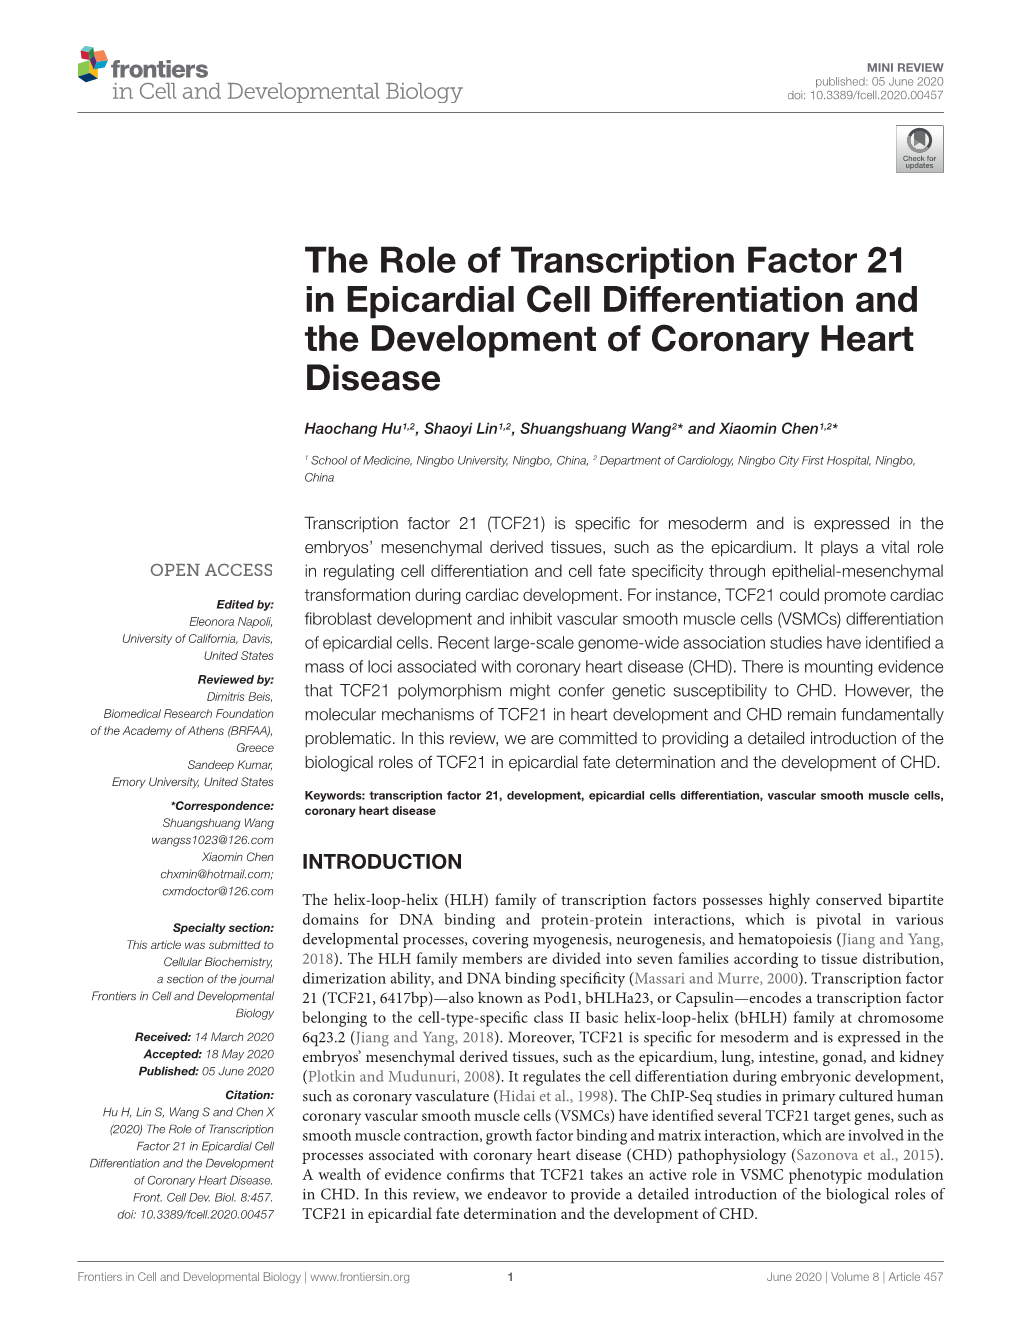 The Role of Transcription Factor 21 in Epicardial Cell Differentiation and the Development of Coronary Heart Disease